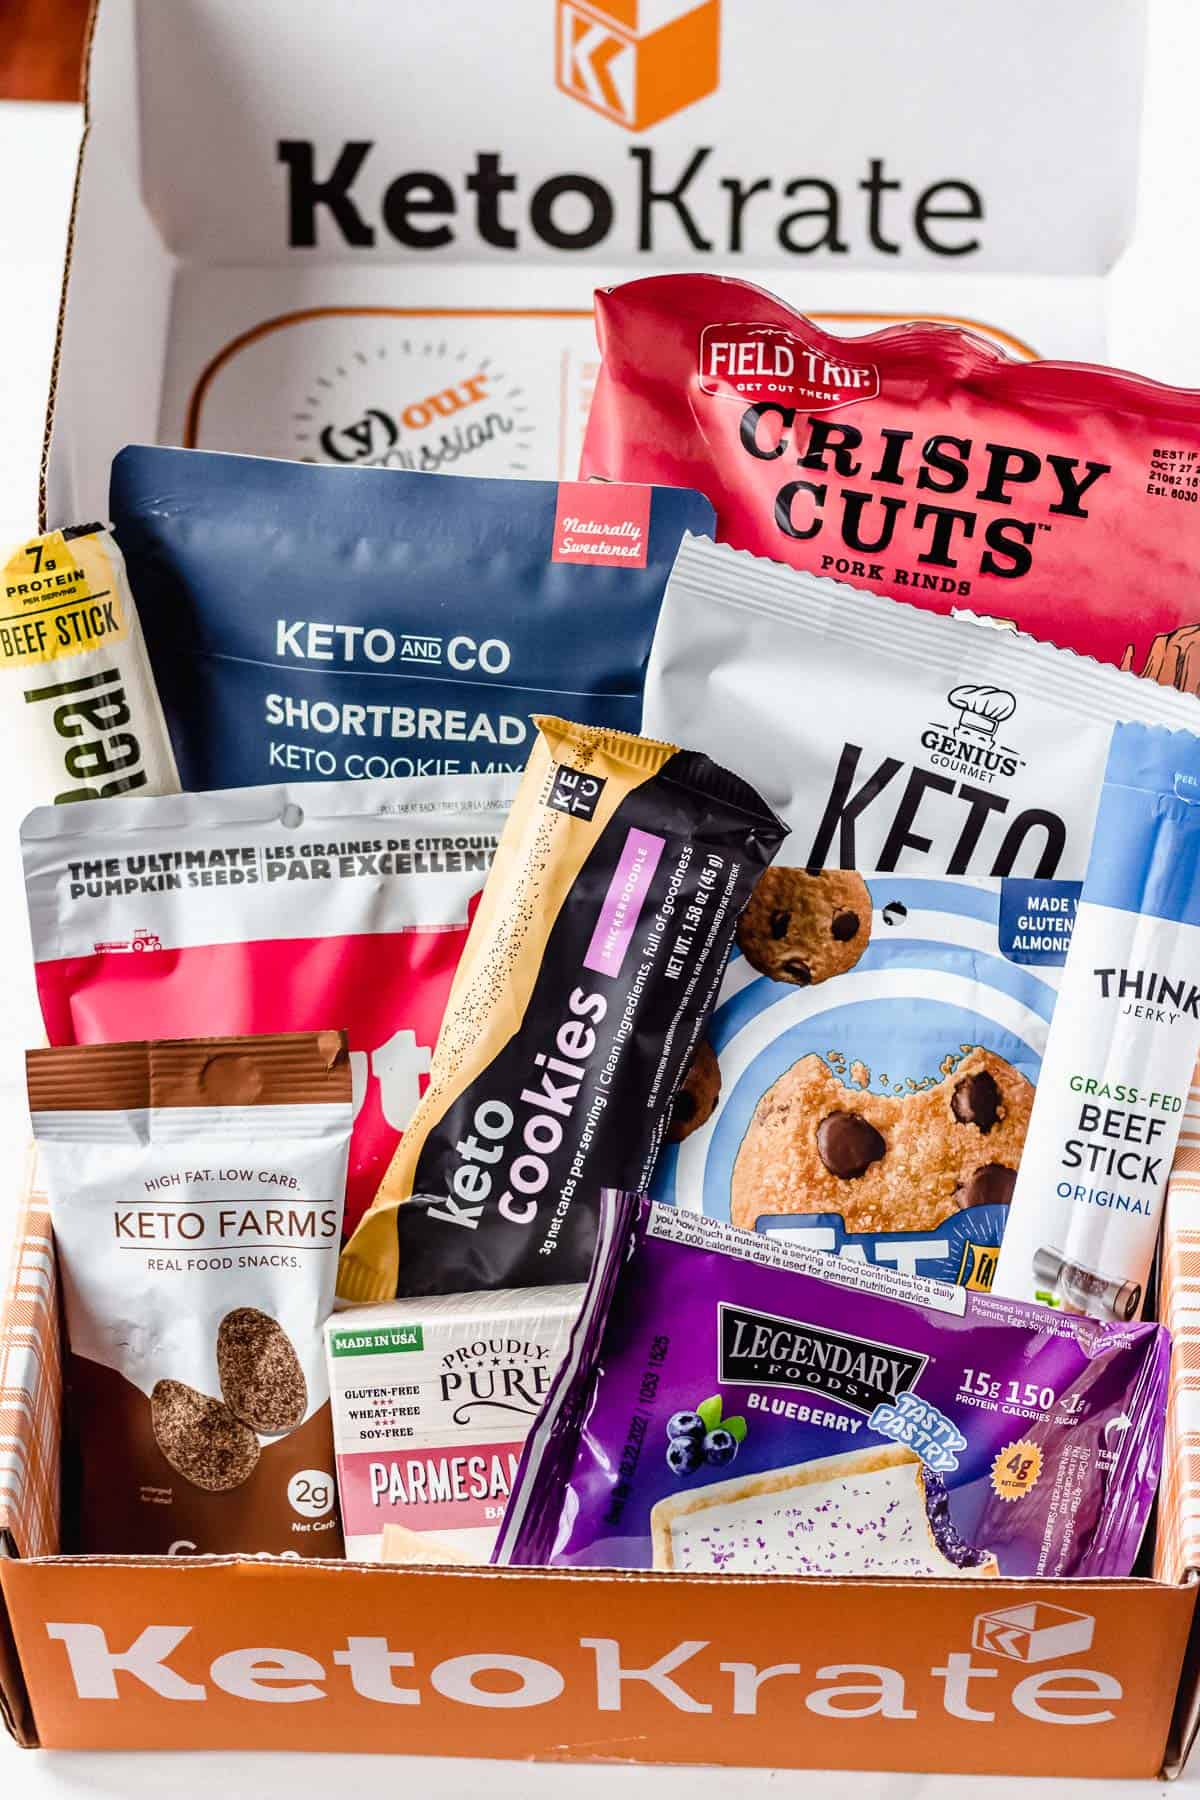 Opened April 2021 Keto Krate box with all of the items inside